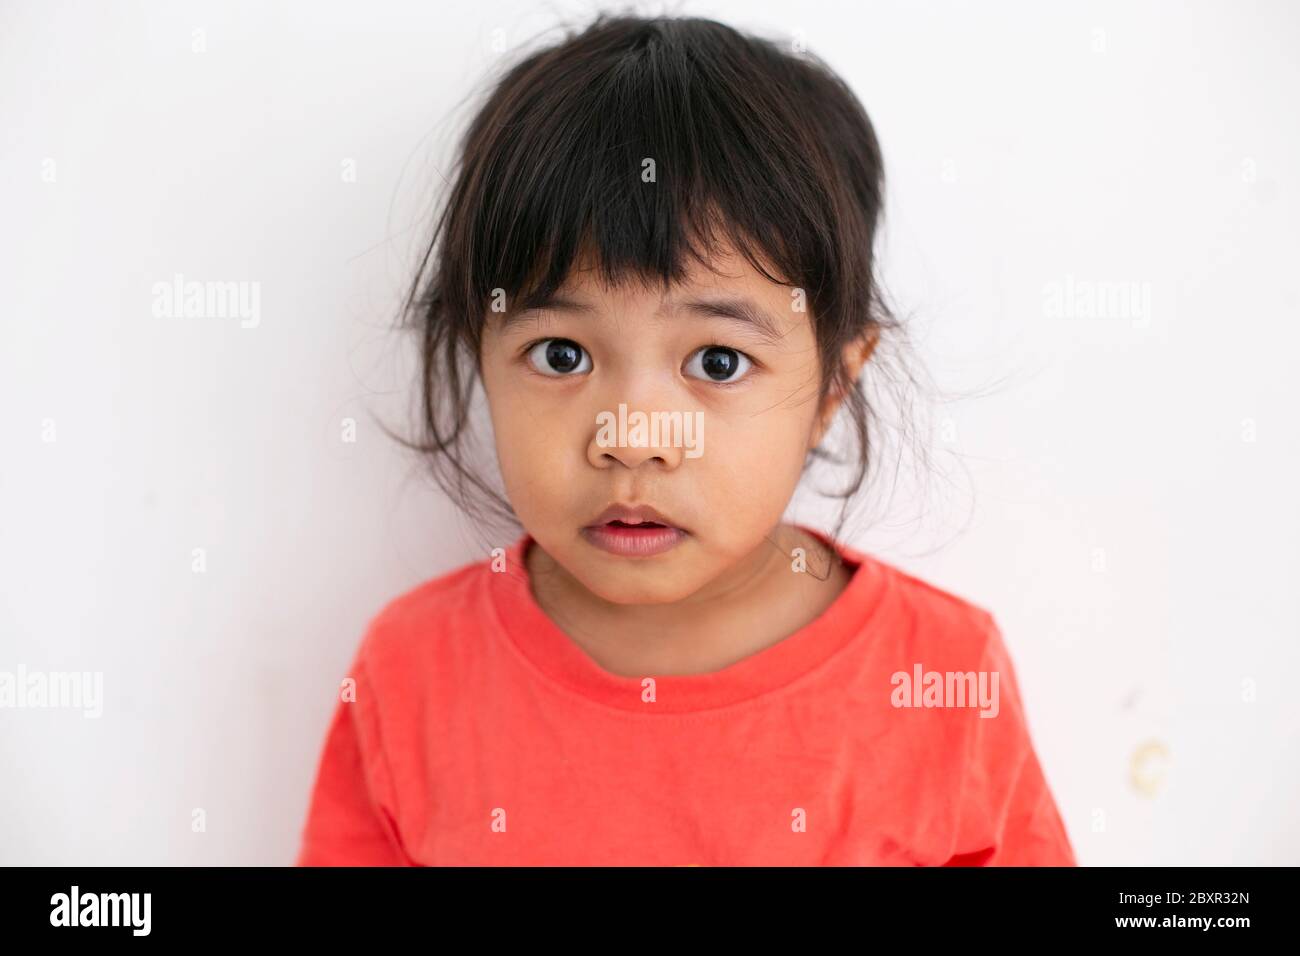 Portrait of girl with autism looking at camera with good eye contact Stock Photo